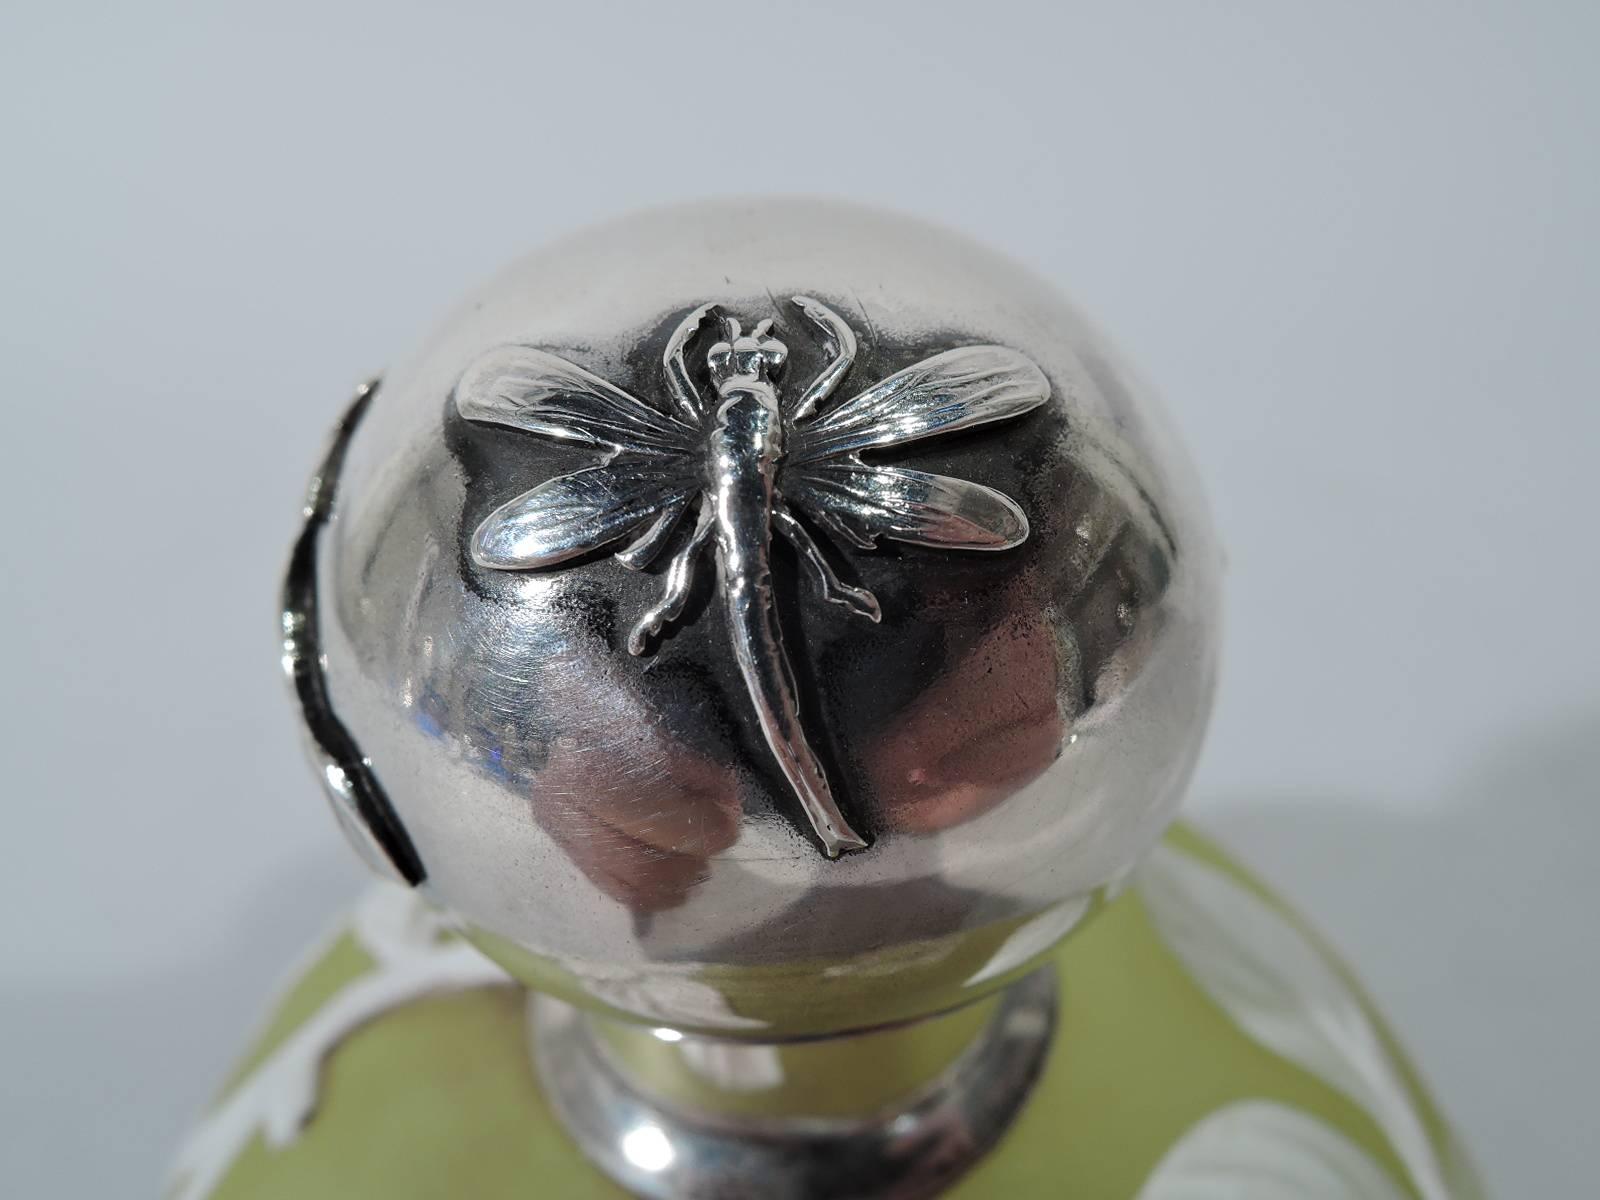 19th Century Shiebler Aesthetic Japonesque Sterling Silver and Cameo Glass Perfume